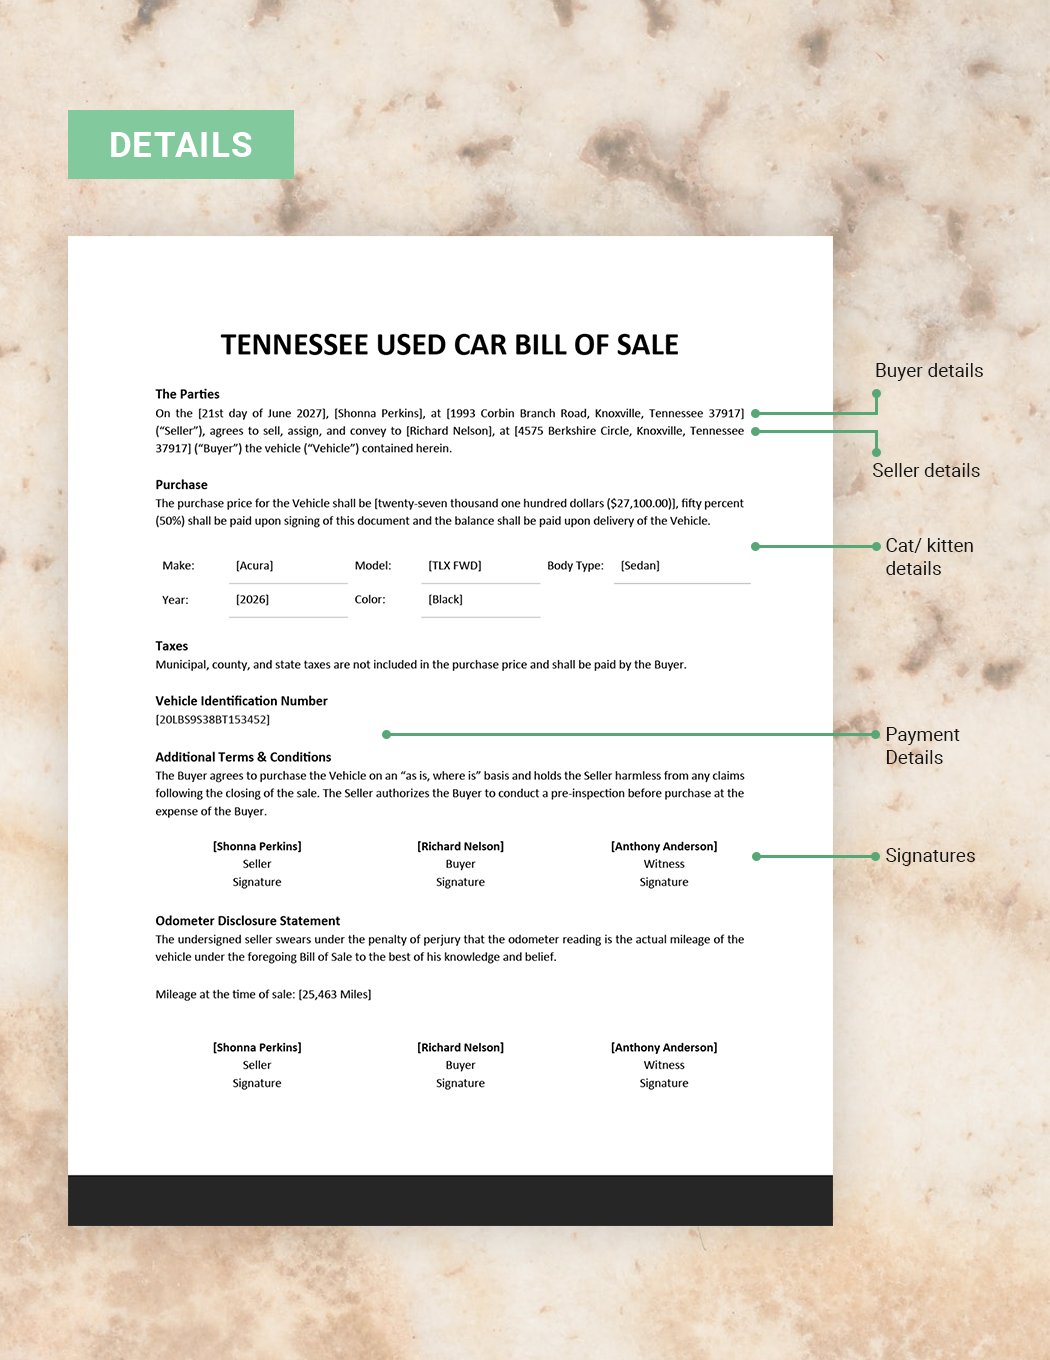 Tennessee Used Car Bill of Sale Form Template